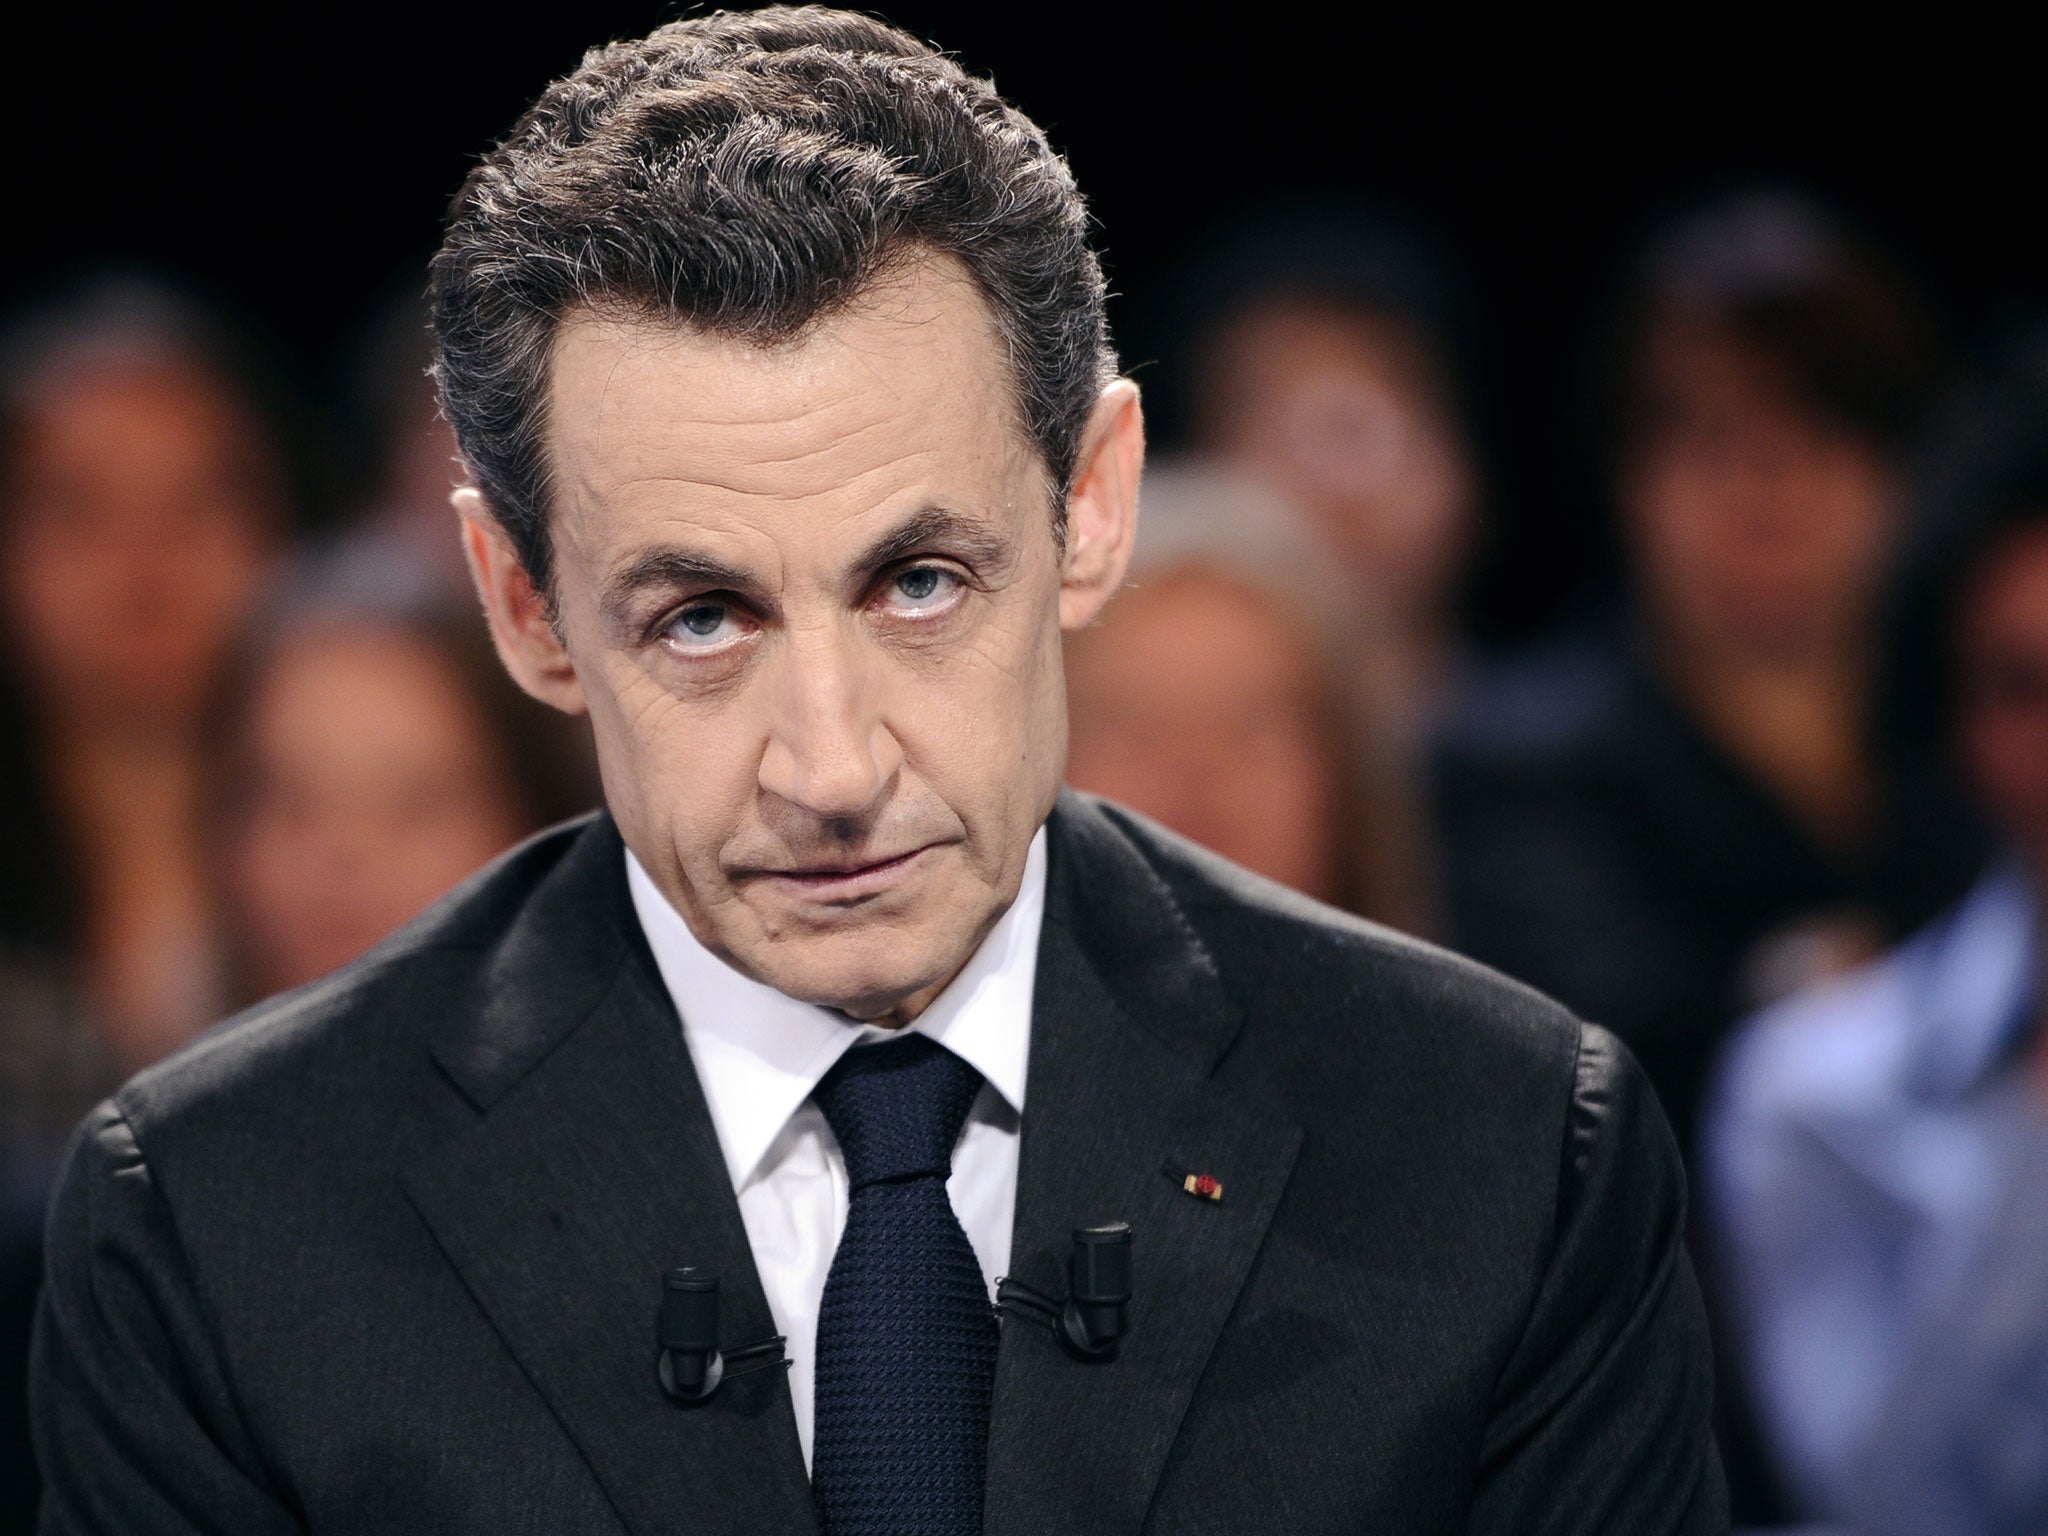 Nicolas Sarkozy has repeatedly denied knowledge of his campaign's overspending